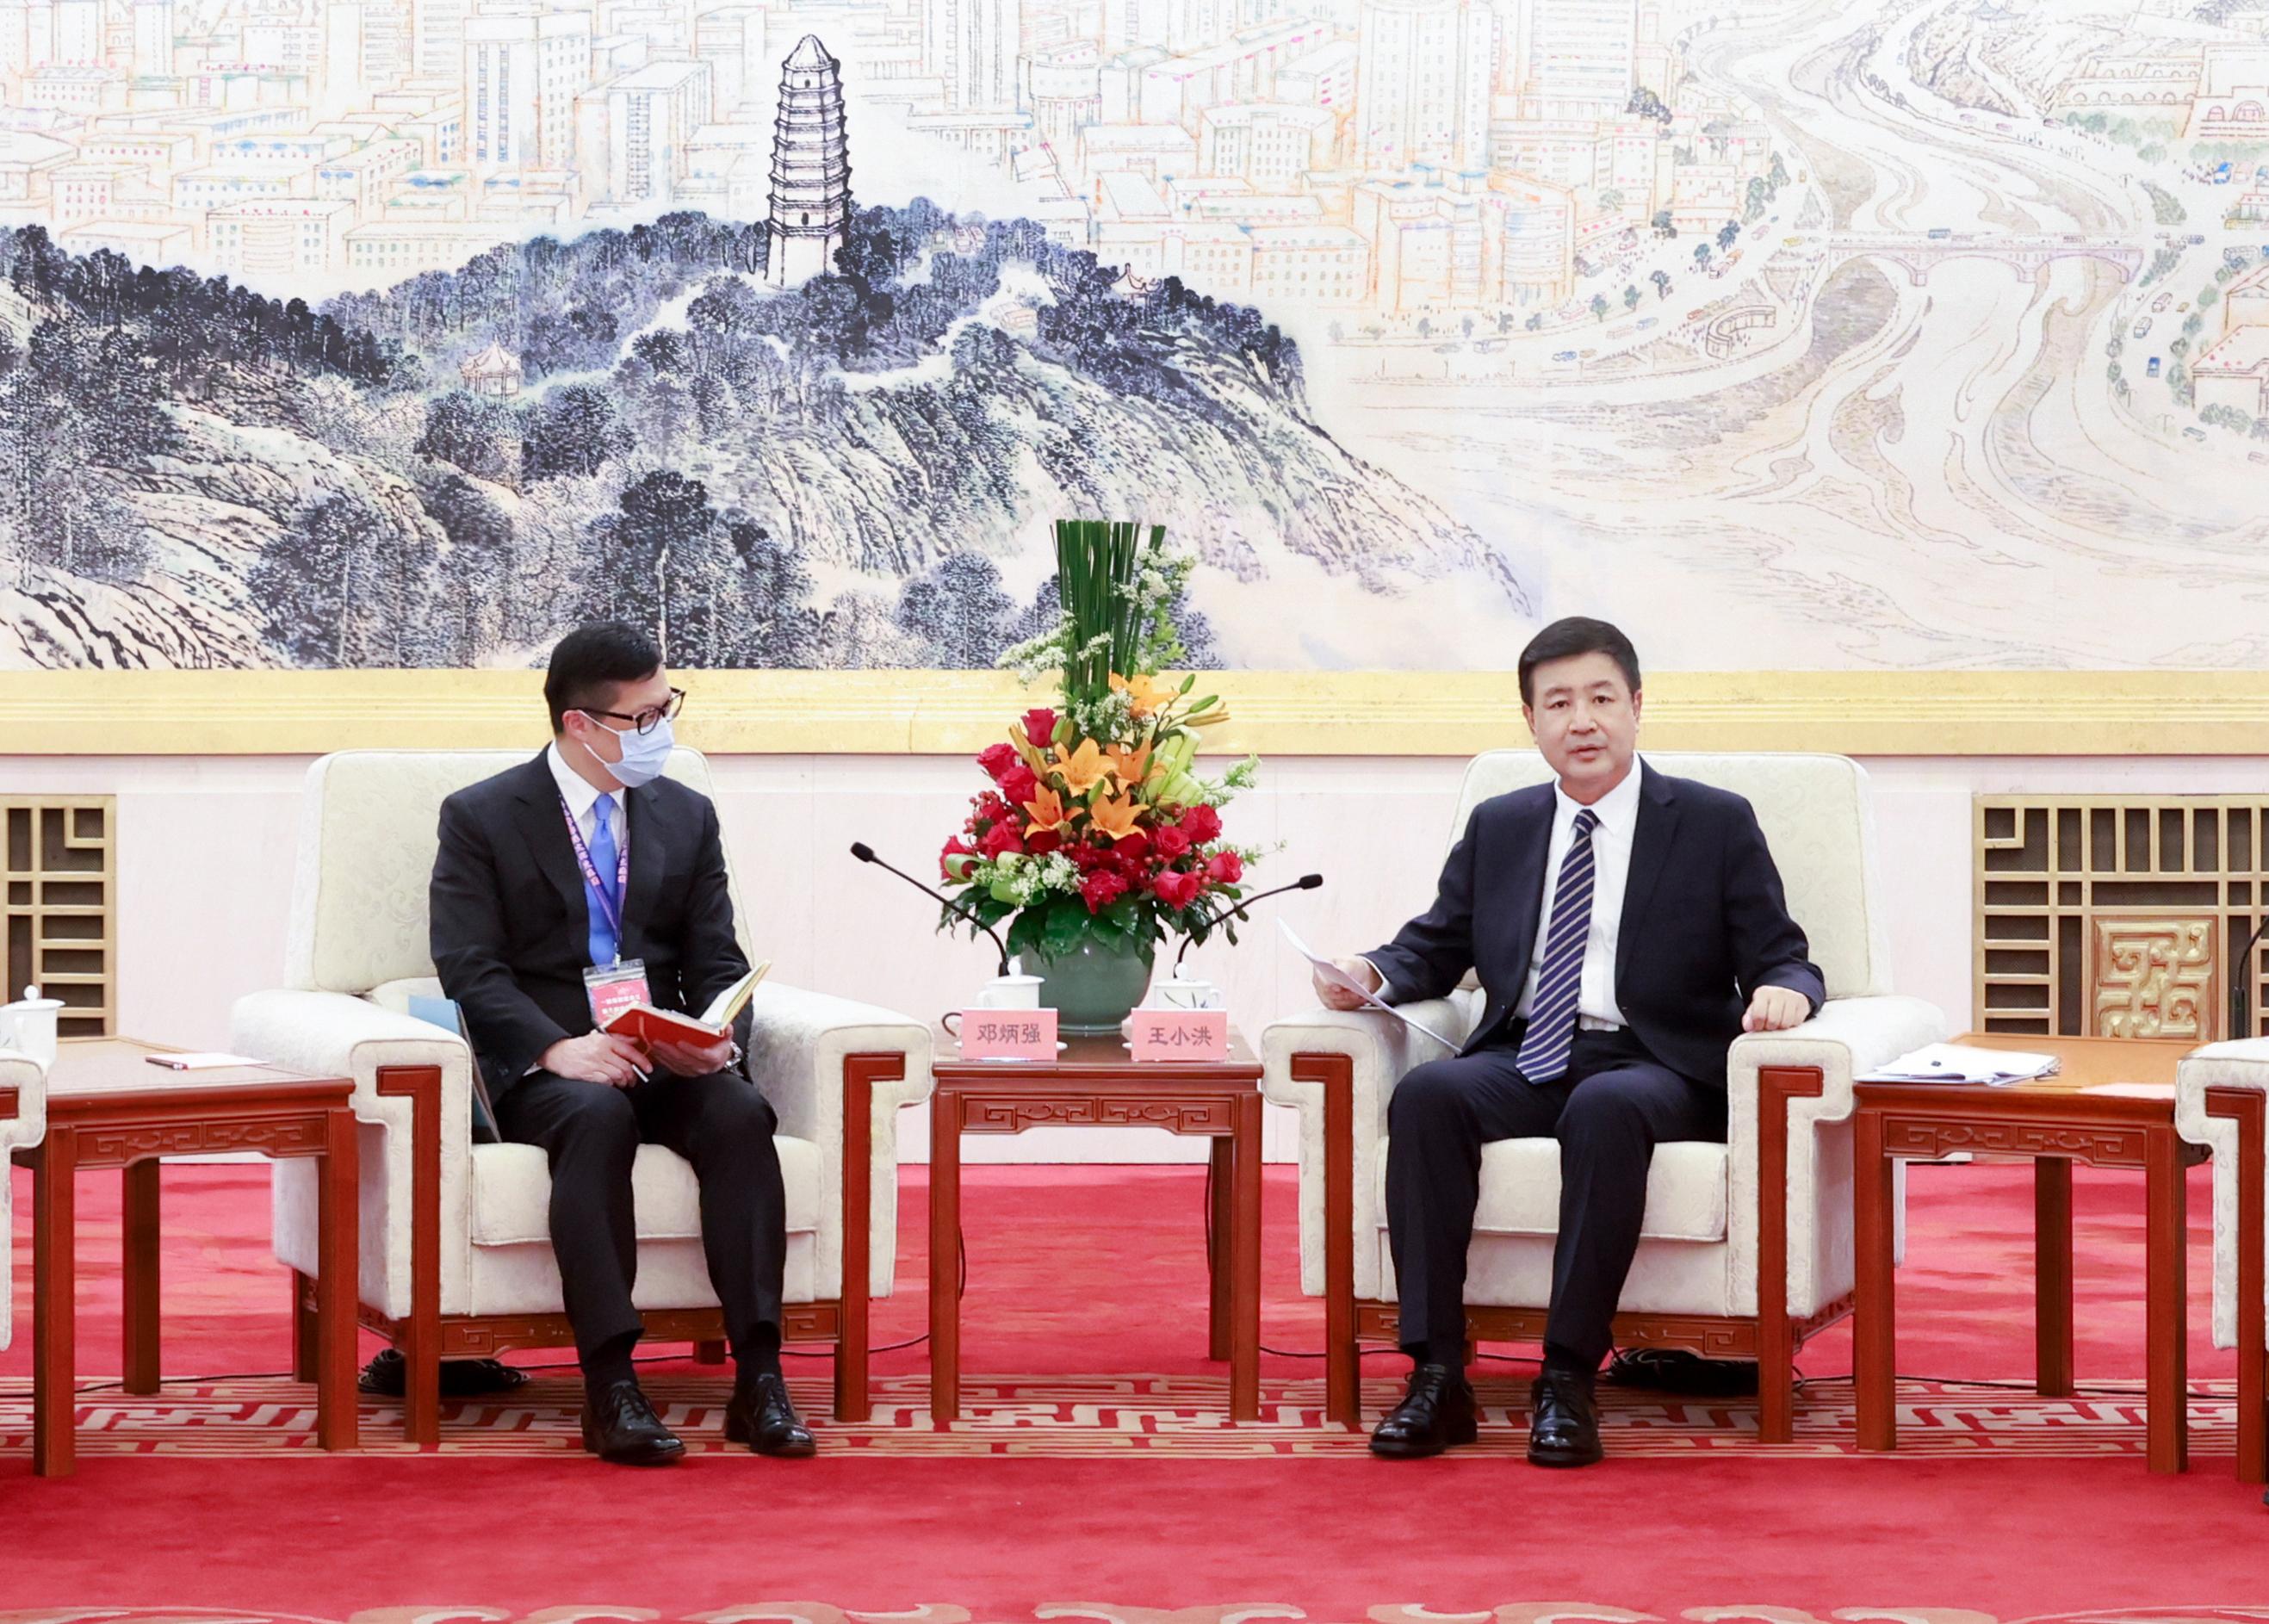 The State Councillor and Minister of Public Security, Mr Wang Xiaohong (right), met with the Secretary for Security, Mr Tang Ping-keung (left), and the Hong Kong Disciplined Services Cultural Exchange Delegation in Beijing on April 24.